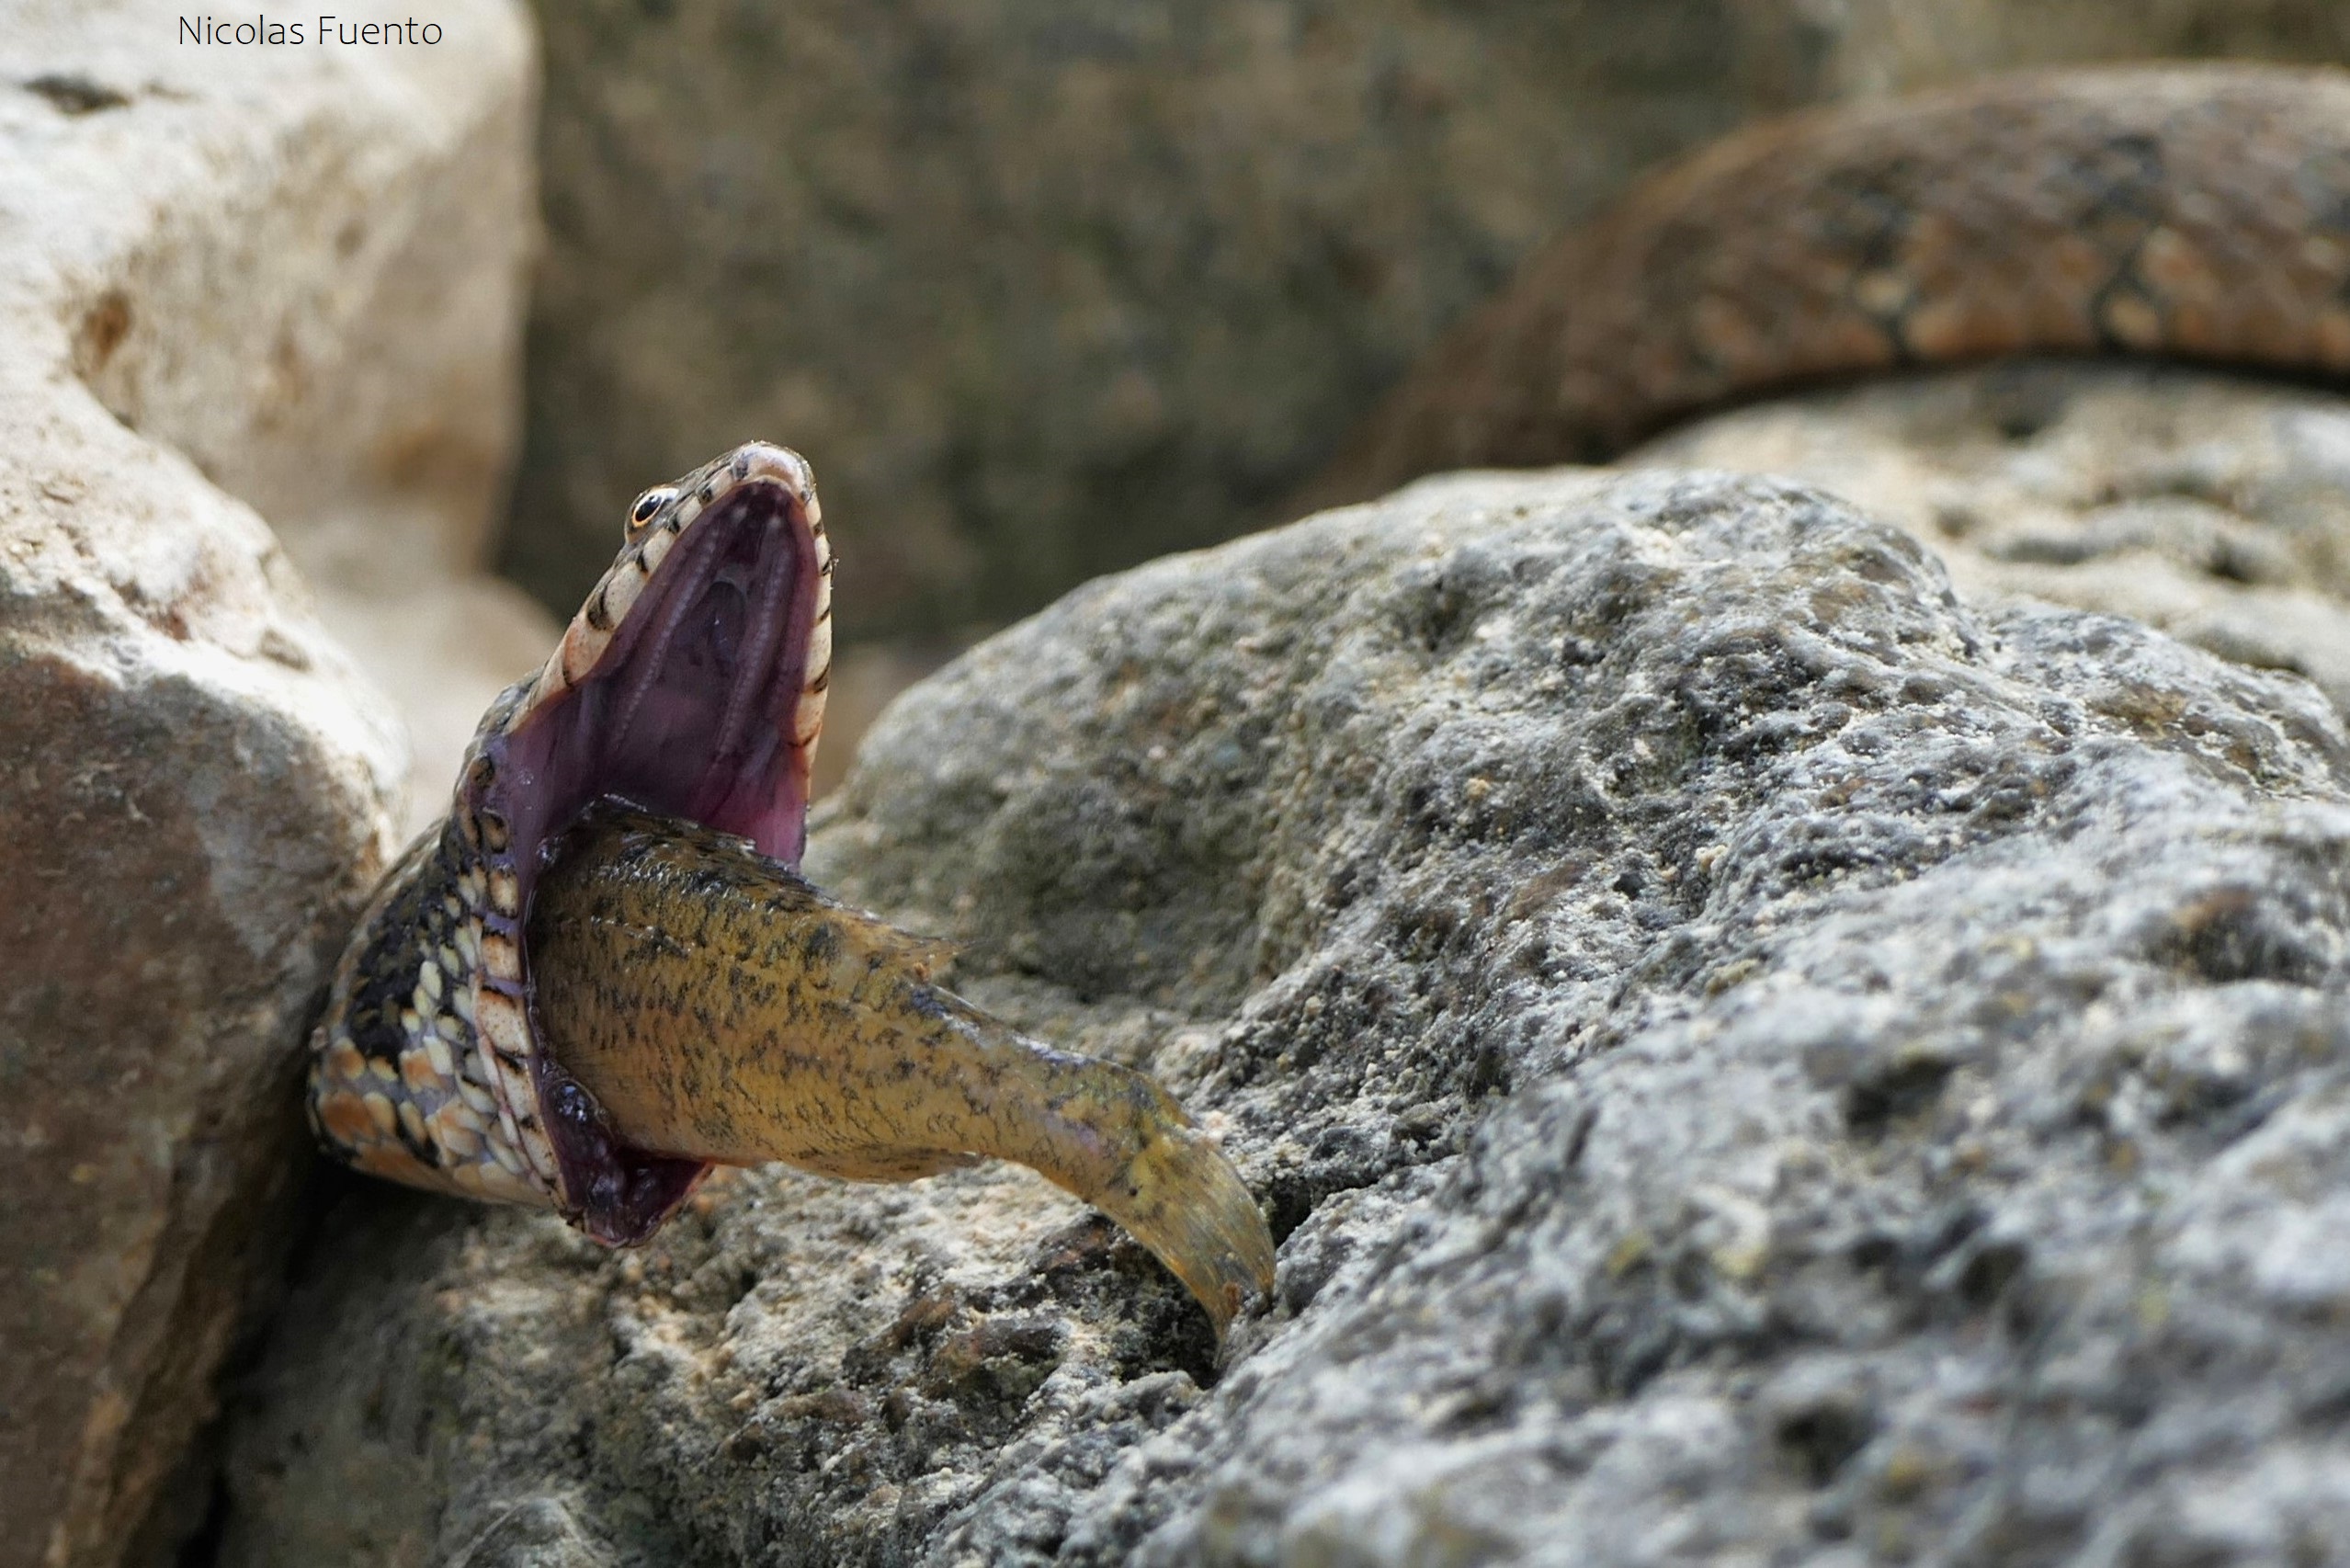 Snake with its mouth open wide with the tail end of a fish sticking out. Grey rocks and the rest of the snake in the background.